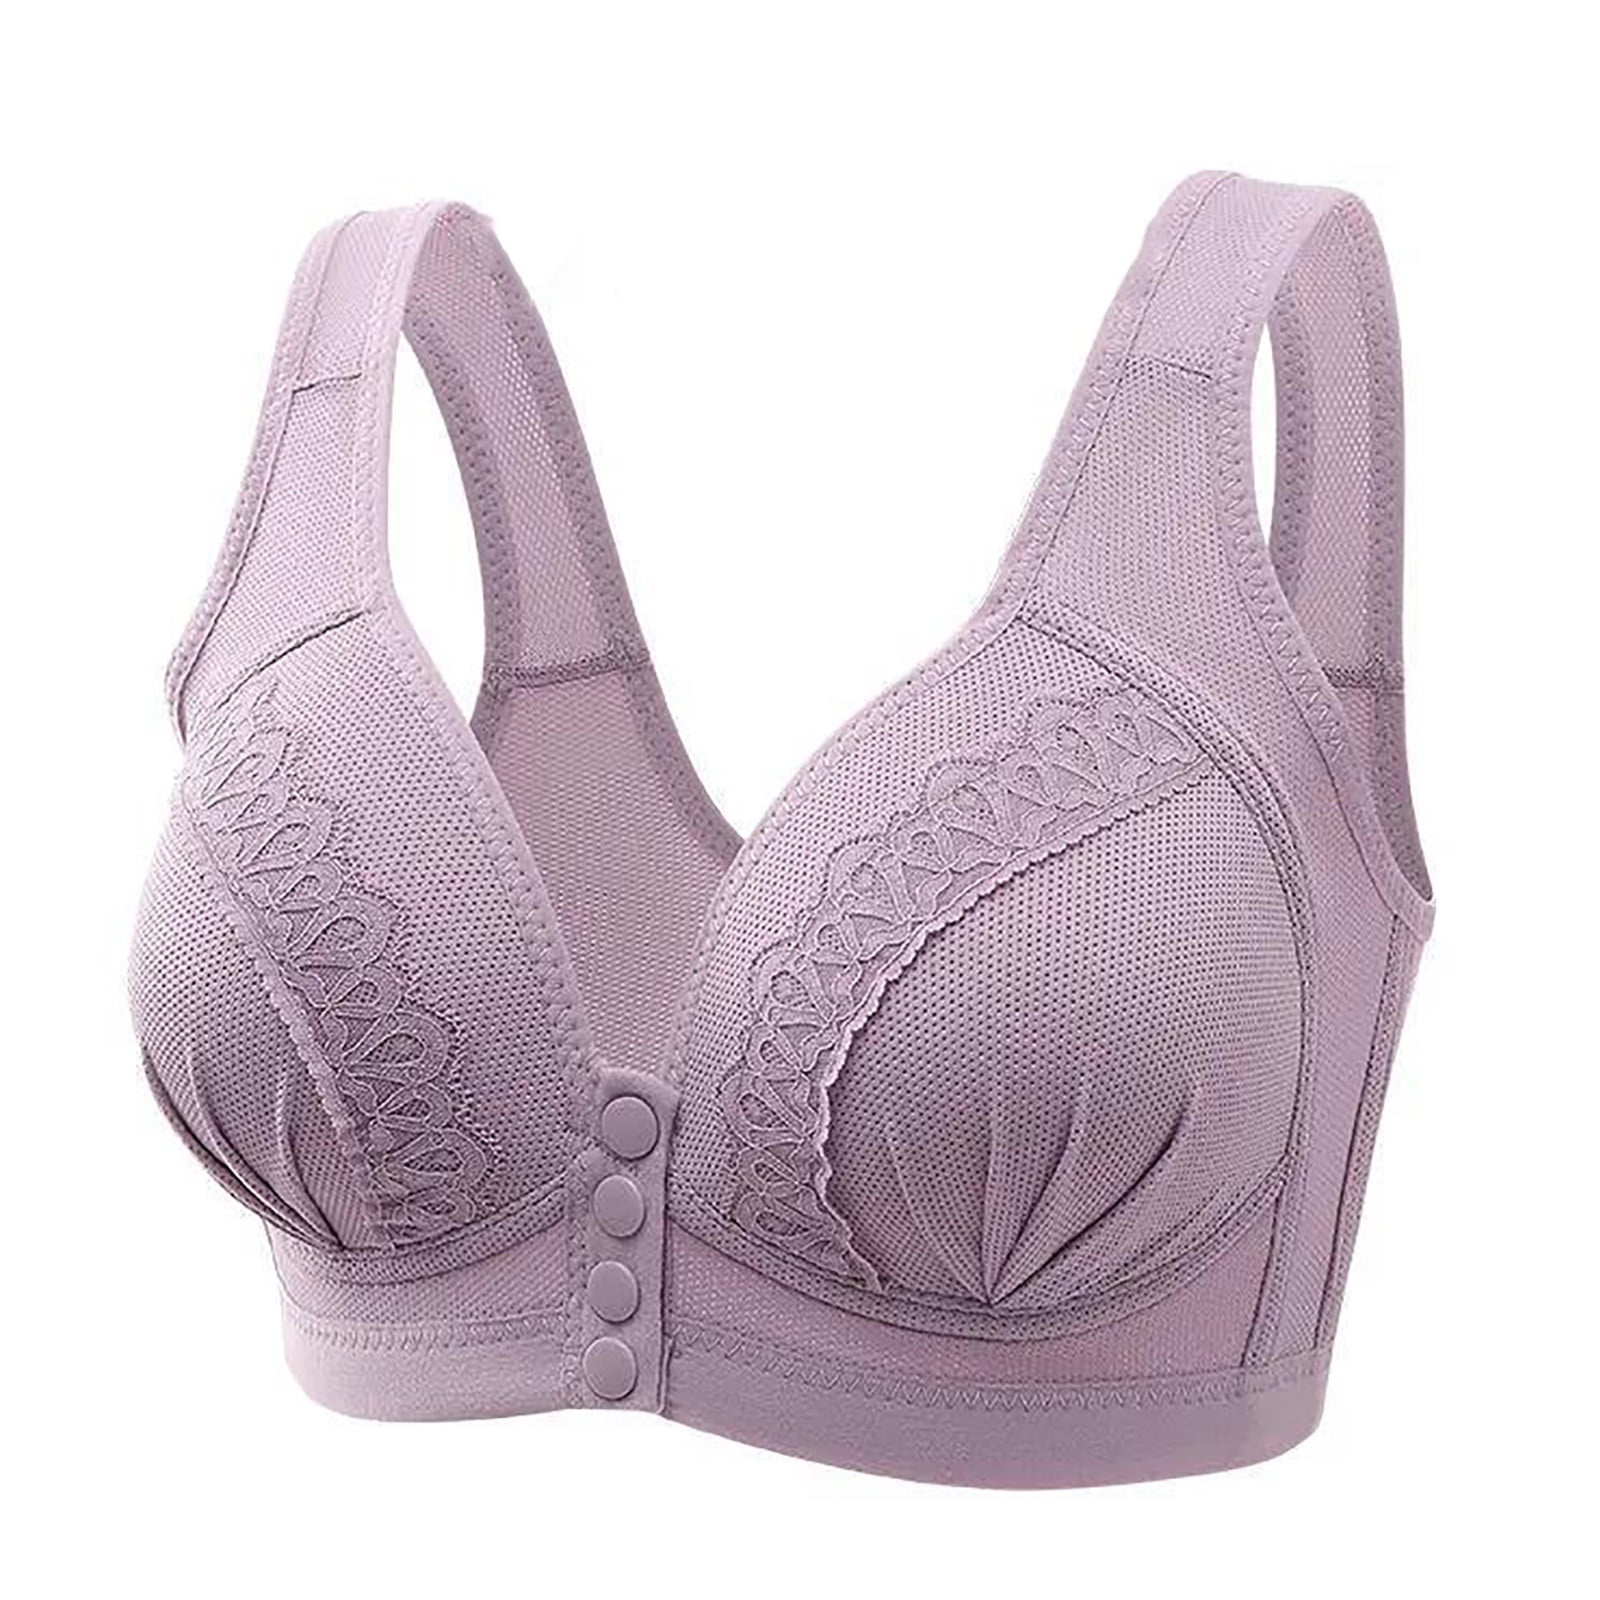  Wide Band Bras for Women Best Bra for Elderly Sagging Breasts  Maternity Bras Armpit Fat Bra Sports Bras for Women Pack Lace Bras  Supportive Bras for Women Comfortable Bras for Older